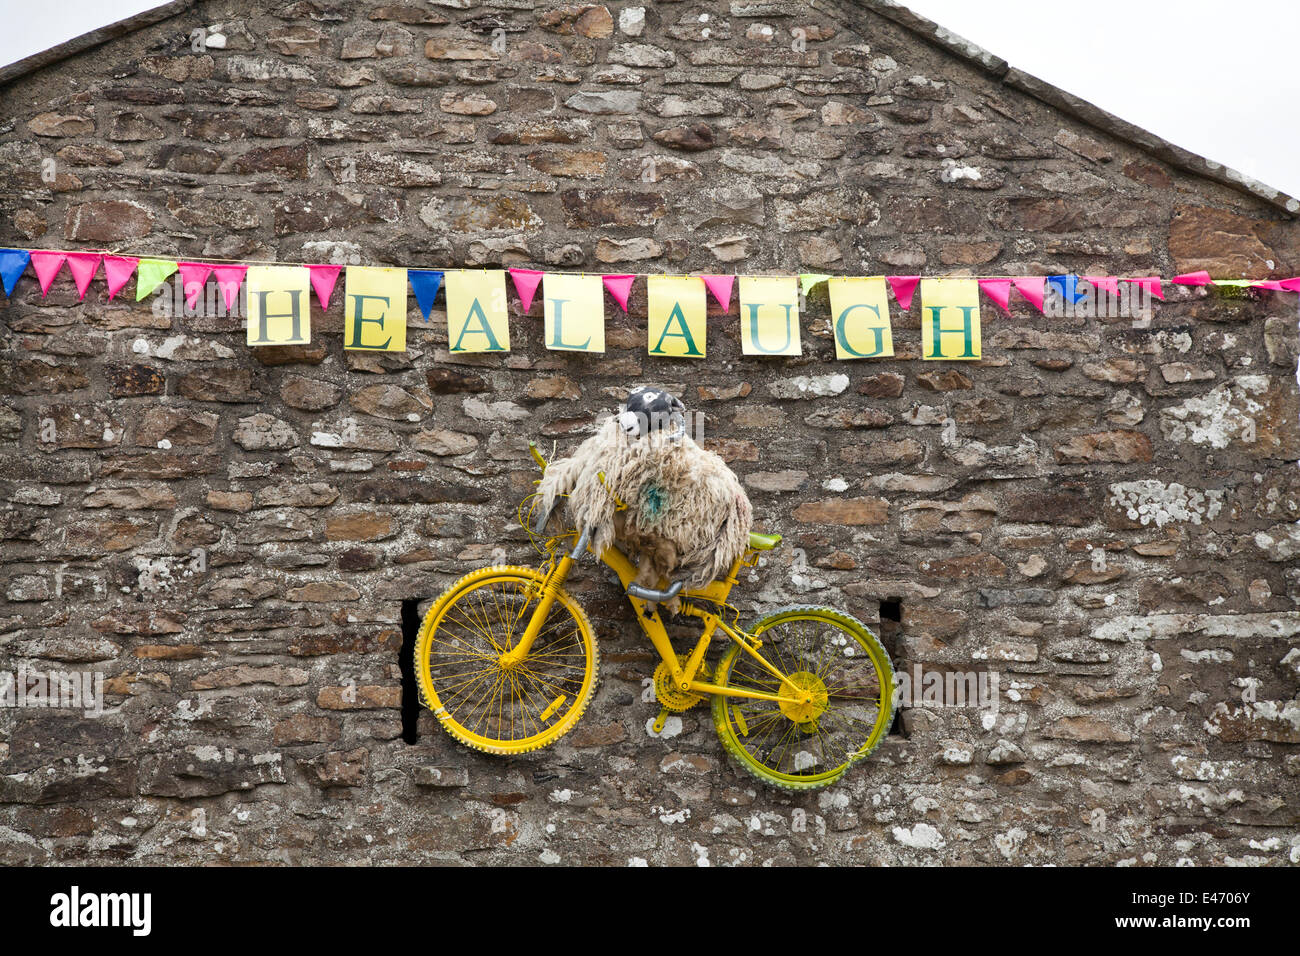 Le Tour de France 2014 Healaugh, Yorkshire Dales, Sheep on a bike decorating house gable.  Thousands of cyclists have been in the Yorkshire Dales travelling the route of the Grand Depart. The roads, and fields assigned to parking and camping are now beginning to fill up in preparation for the event on Saturday.  The Tour de France is the largest annual sporting event in the world. It is the first time Le Tour has visited the north of England having previously only made visits to the south coast and the capital. Stock Photo